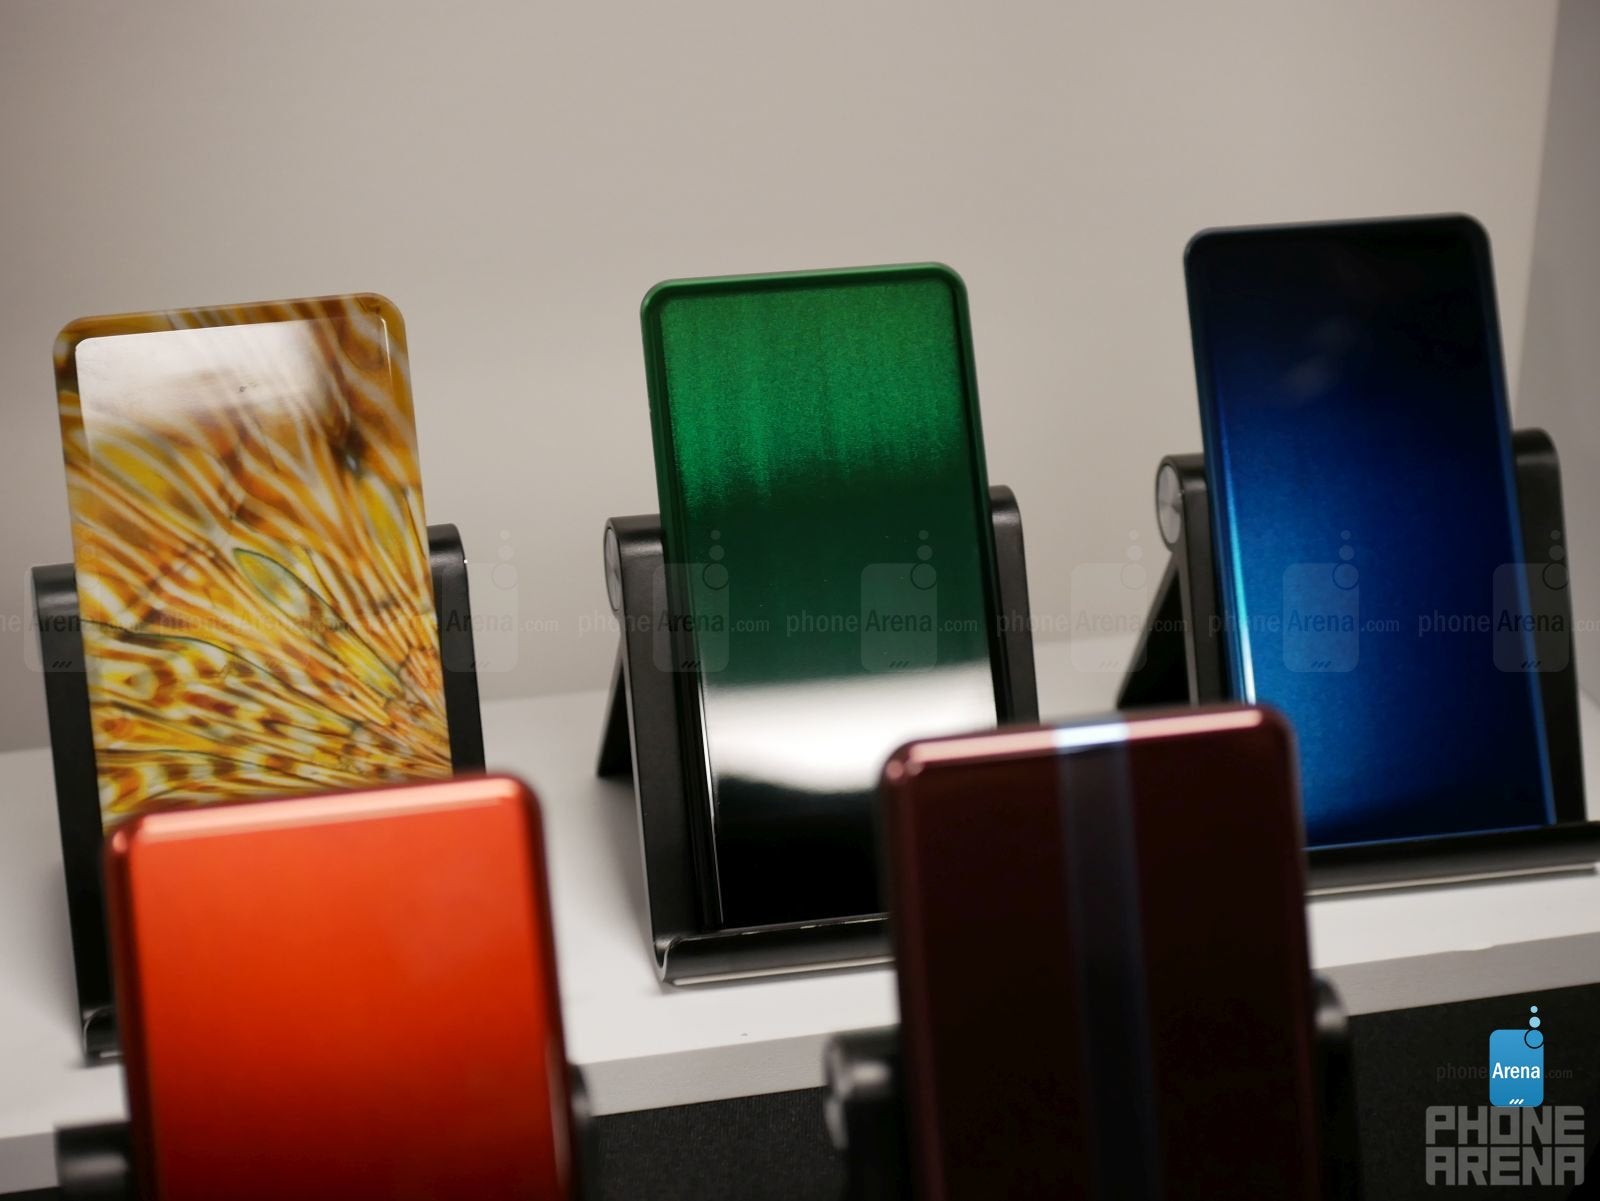 Corning&#039;s new inkjet technology allows them to print images on a piece of glass, with some offering unique textures to emulate the look and feel of real-life materials such as wood. - Corning&#039;s Technology Center tour: where glass innovations are born